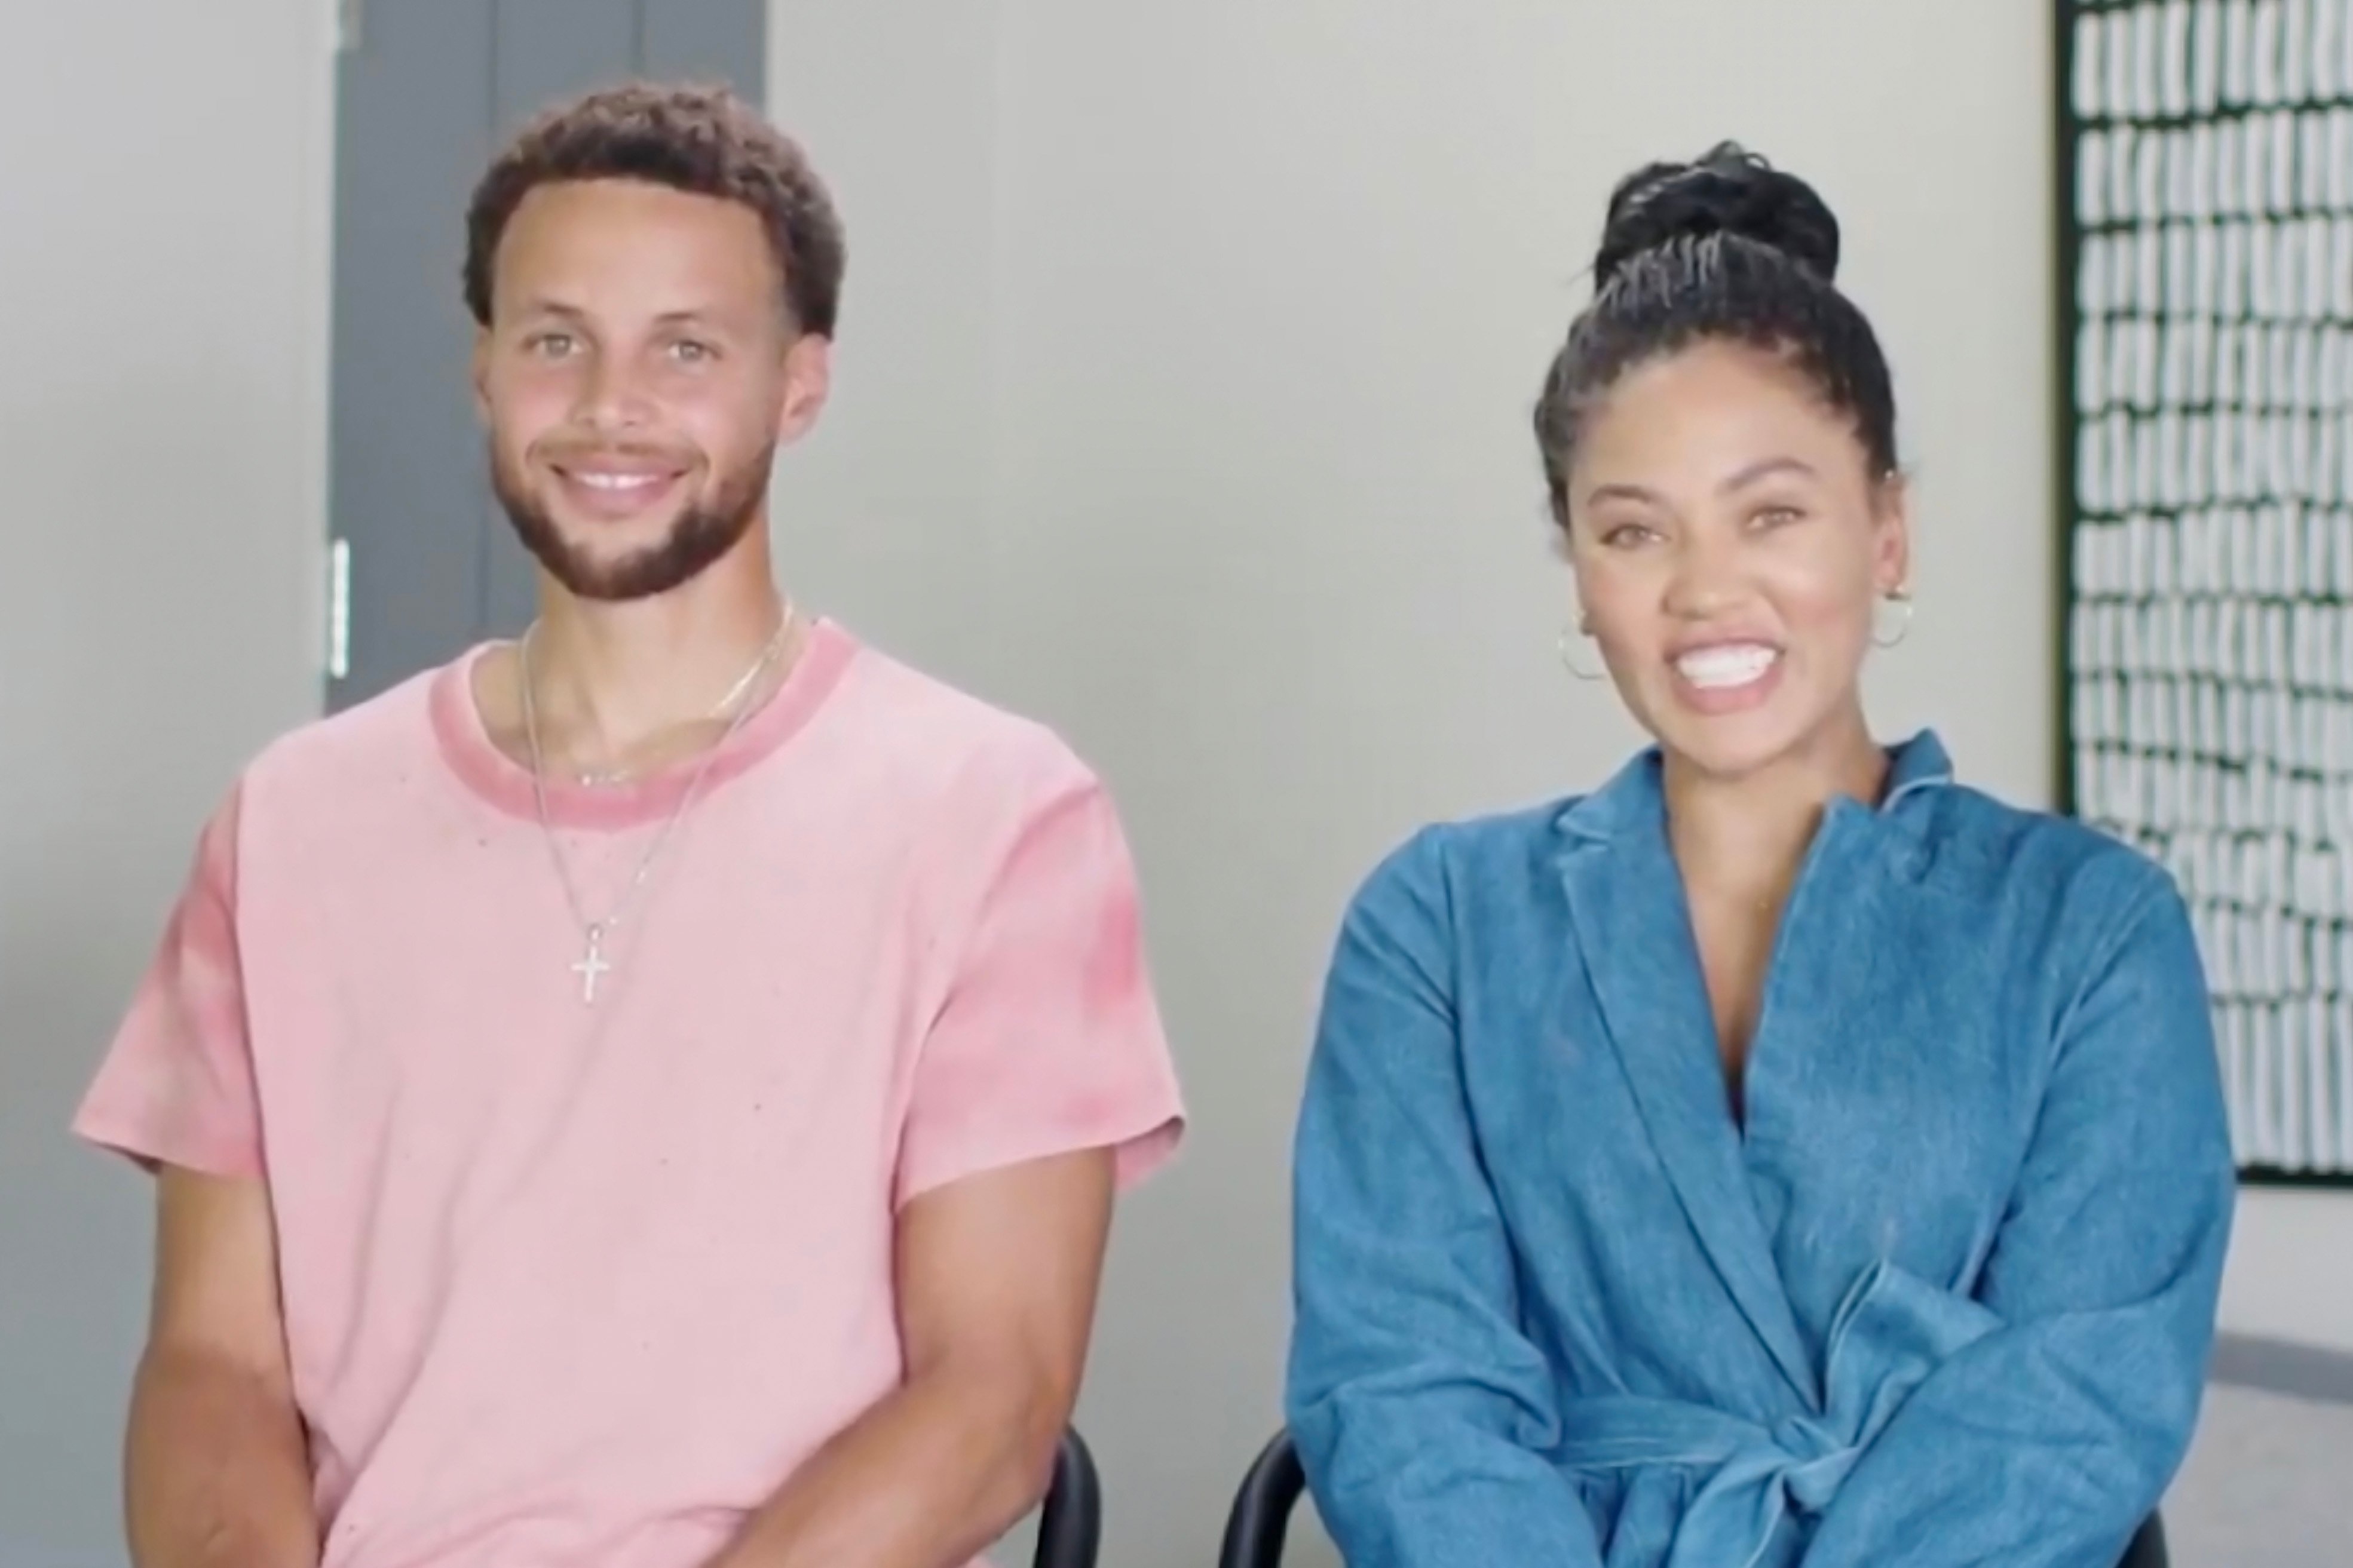 Screengrab of Steph Curry and Ayesha Curry sitting next to each other smiling during the livestream of the 2020 Democratic National Convention